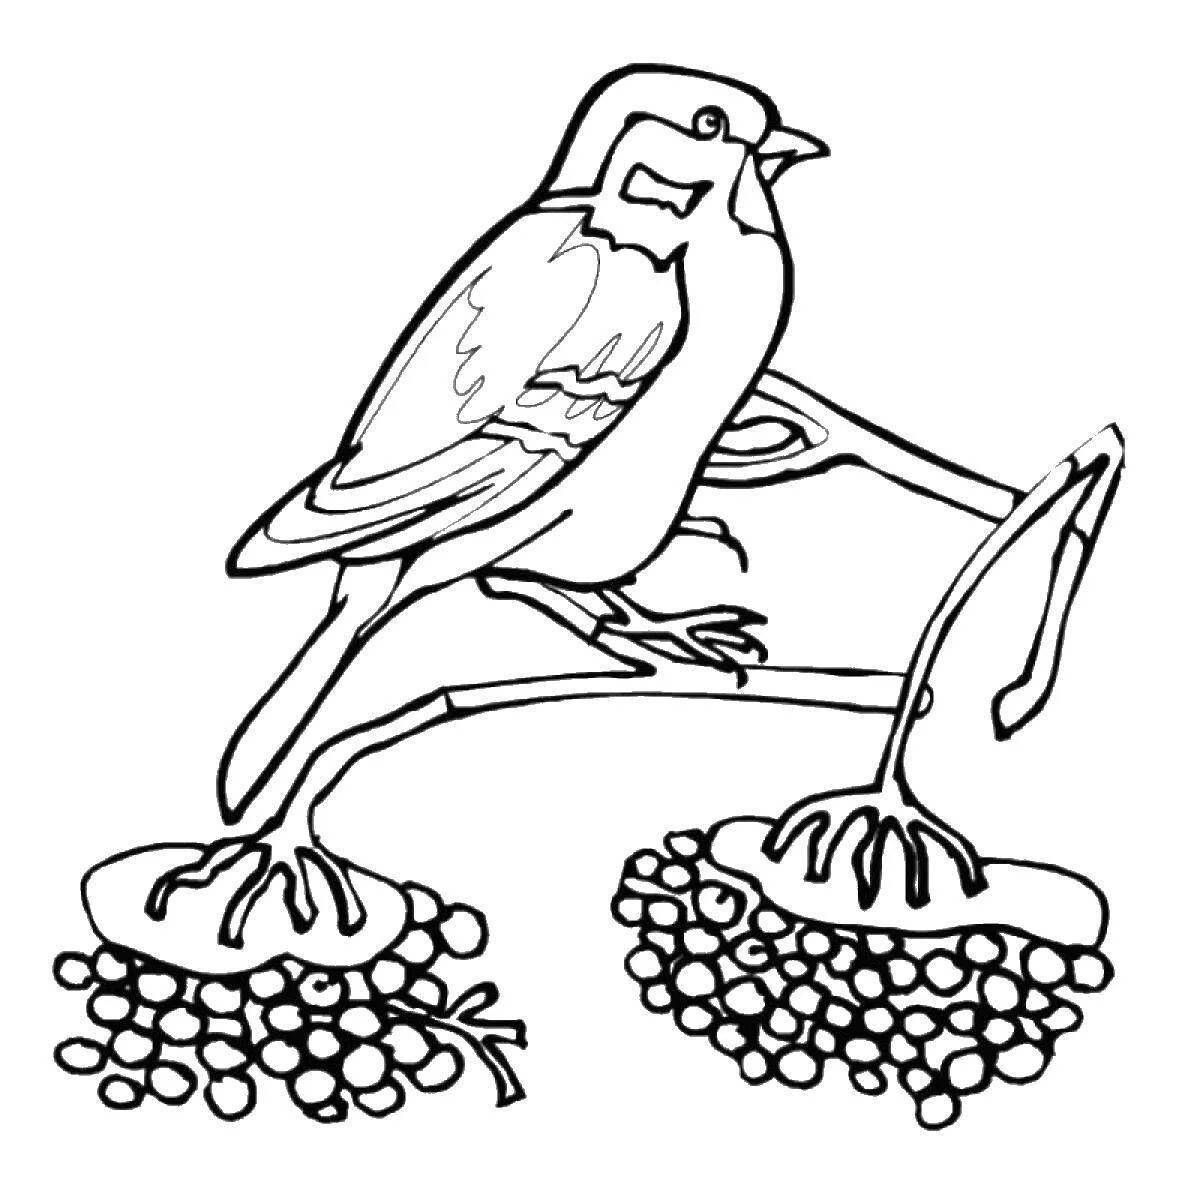 Adorable bird feeder coloring book for 2-3 year olds